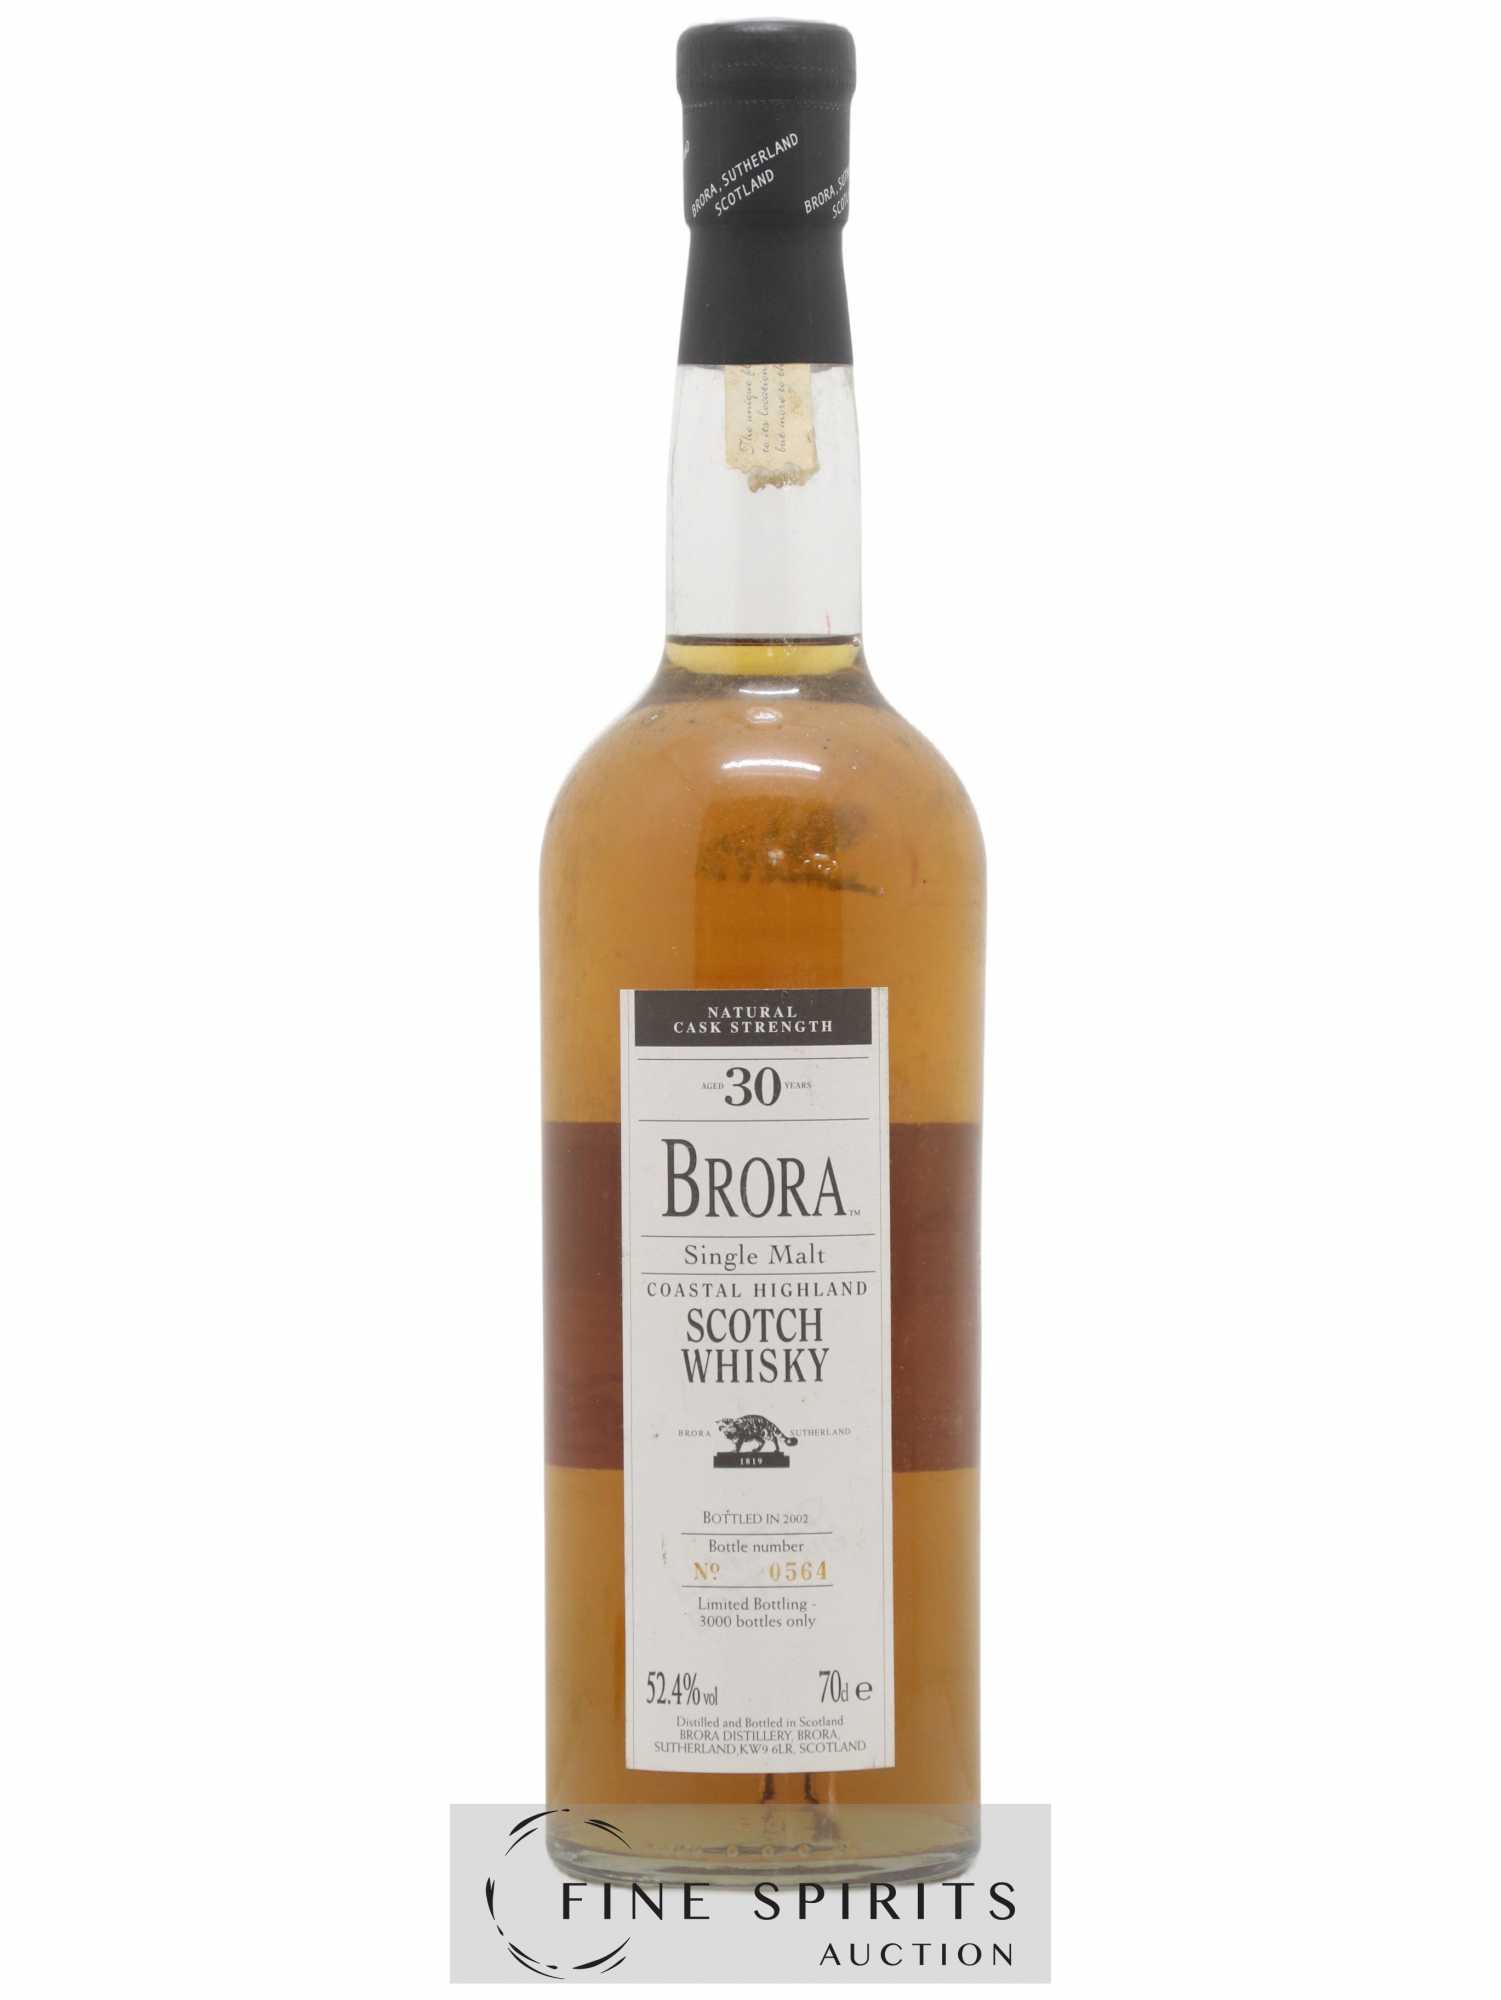 Brora 30 years Of. One of 3000 - bottled 2002 Limited Bottling 